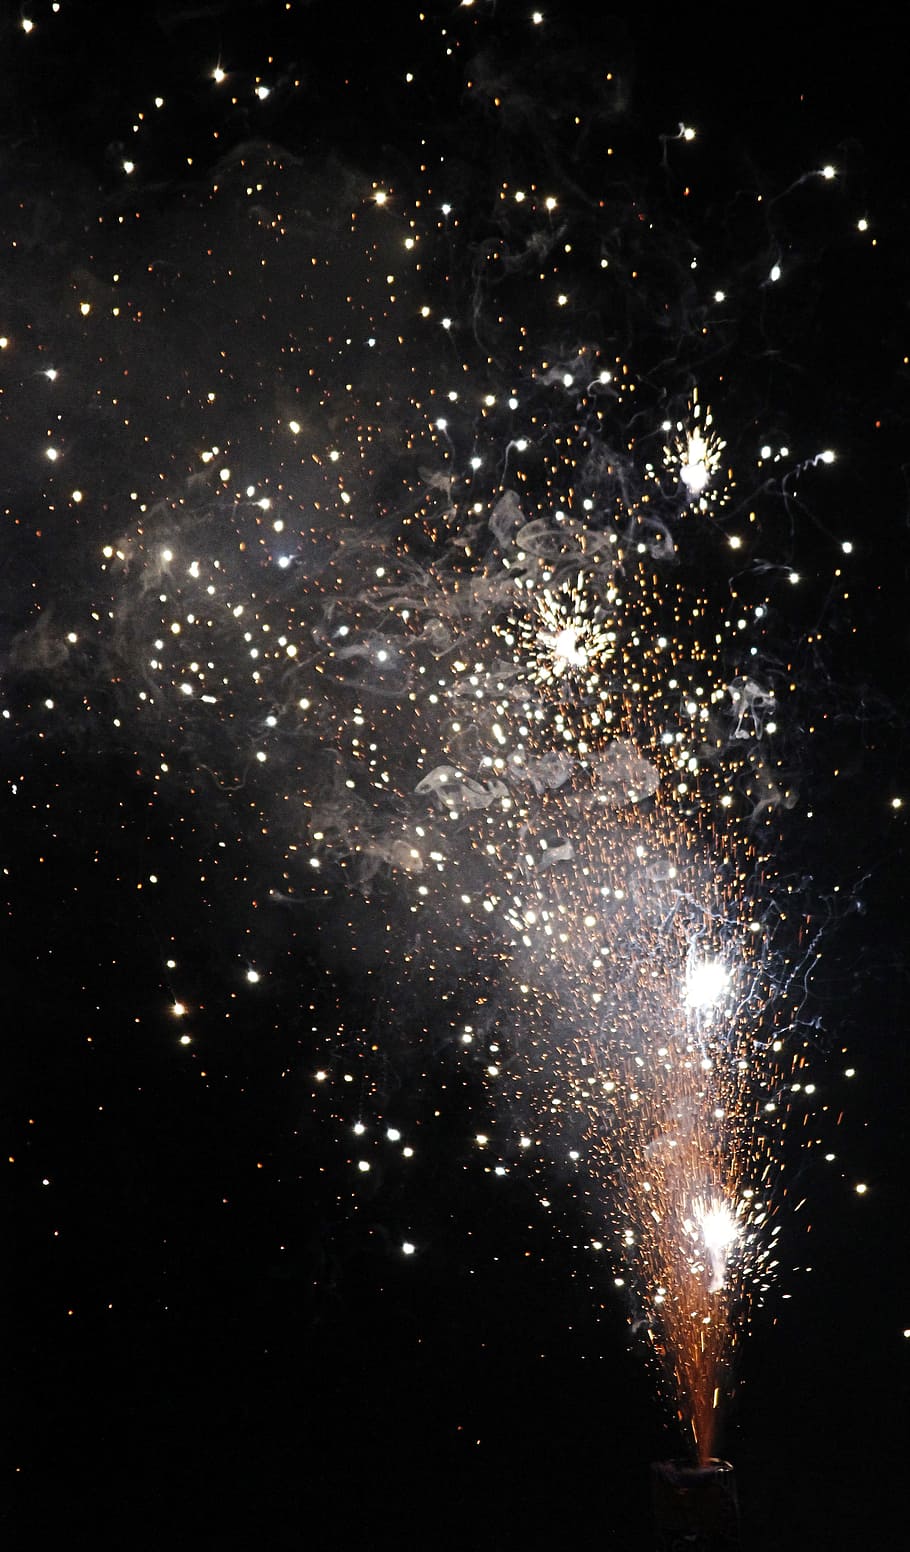 Firecracker, Sparks, Explosion, Bengal, star - space, space, astronomy, galaxy, space exploration, night